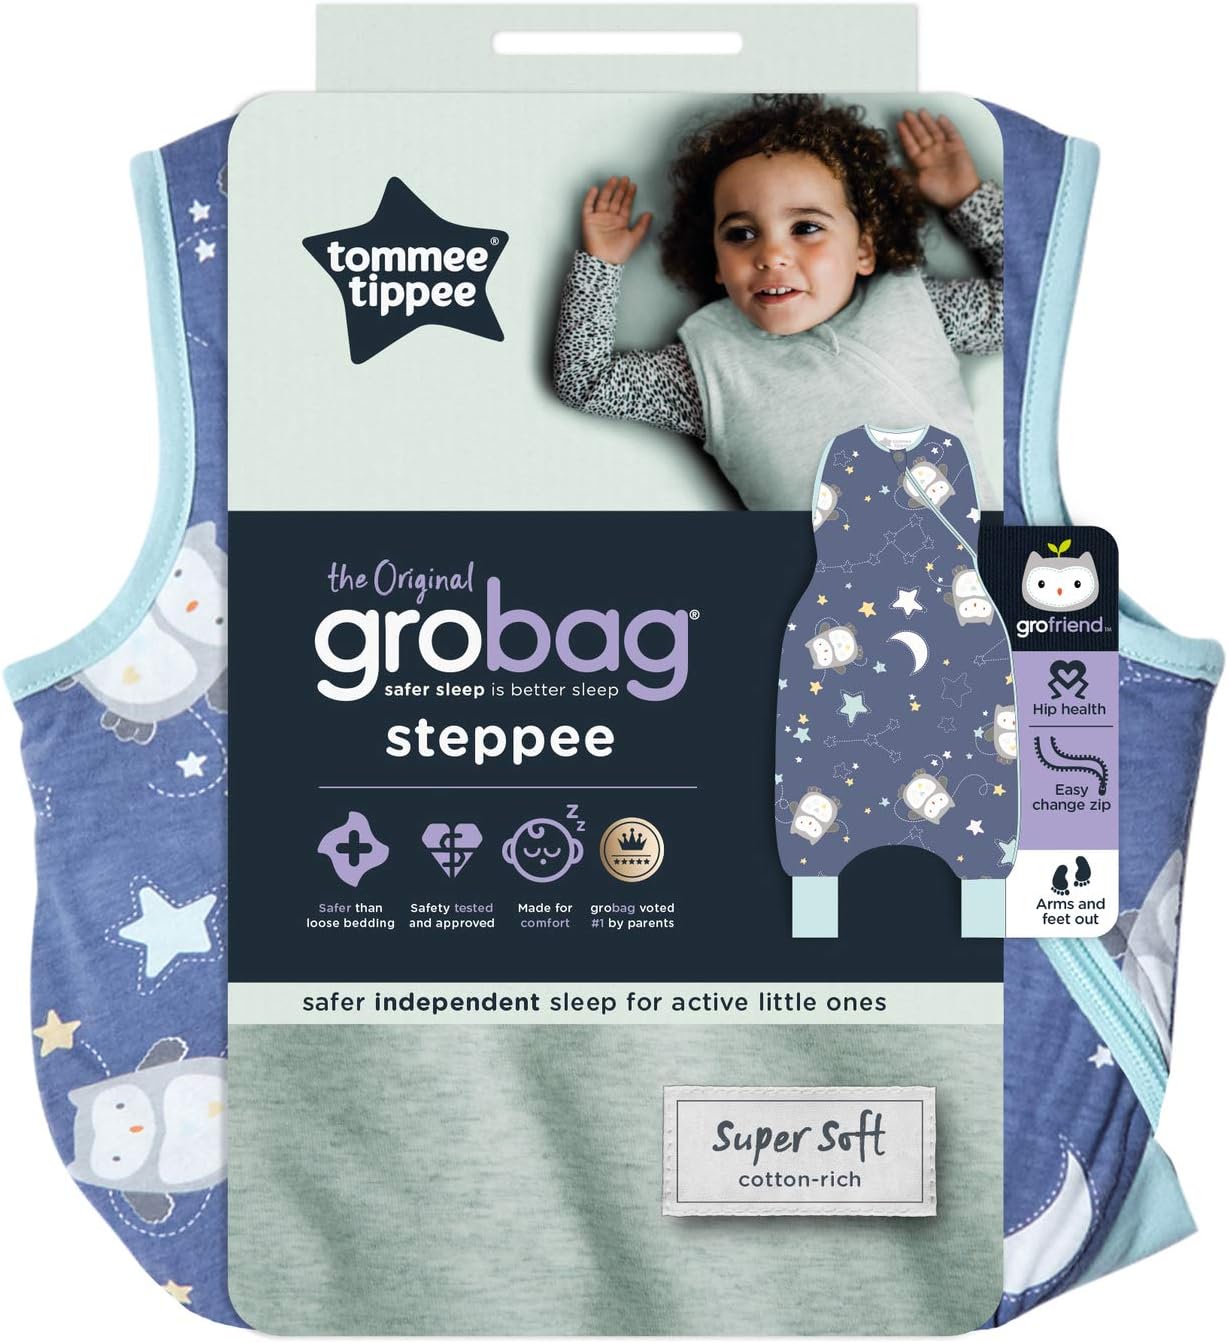 Tommee Tippee Baby Sleeping Bag with Legs, The Original Grobag Steppee, Baby Romper Suit, Soft Cotton-Rich Fabric, 6-18m, 1.0 Tog, Ollie Dreams